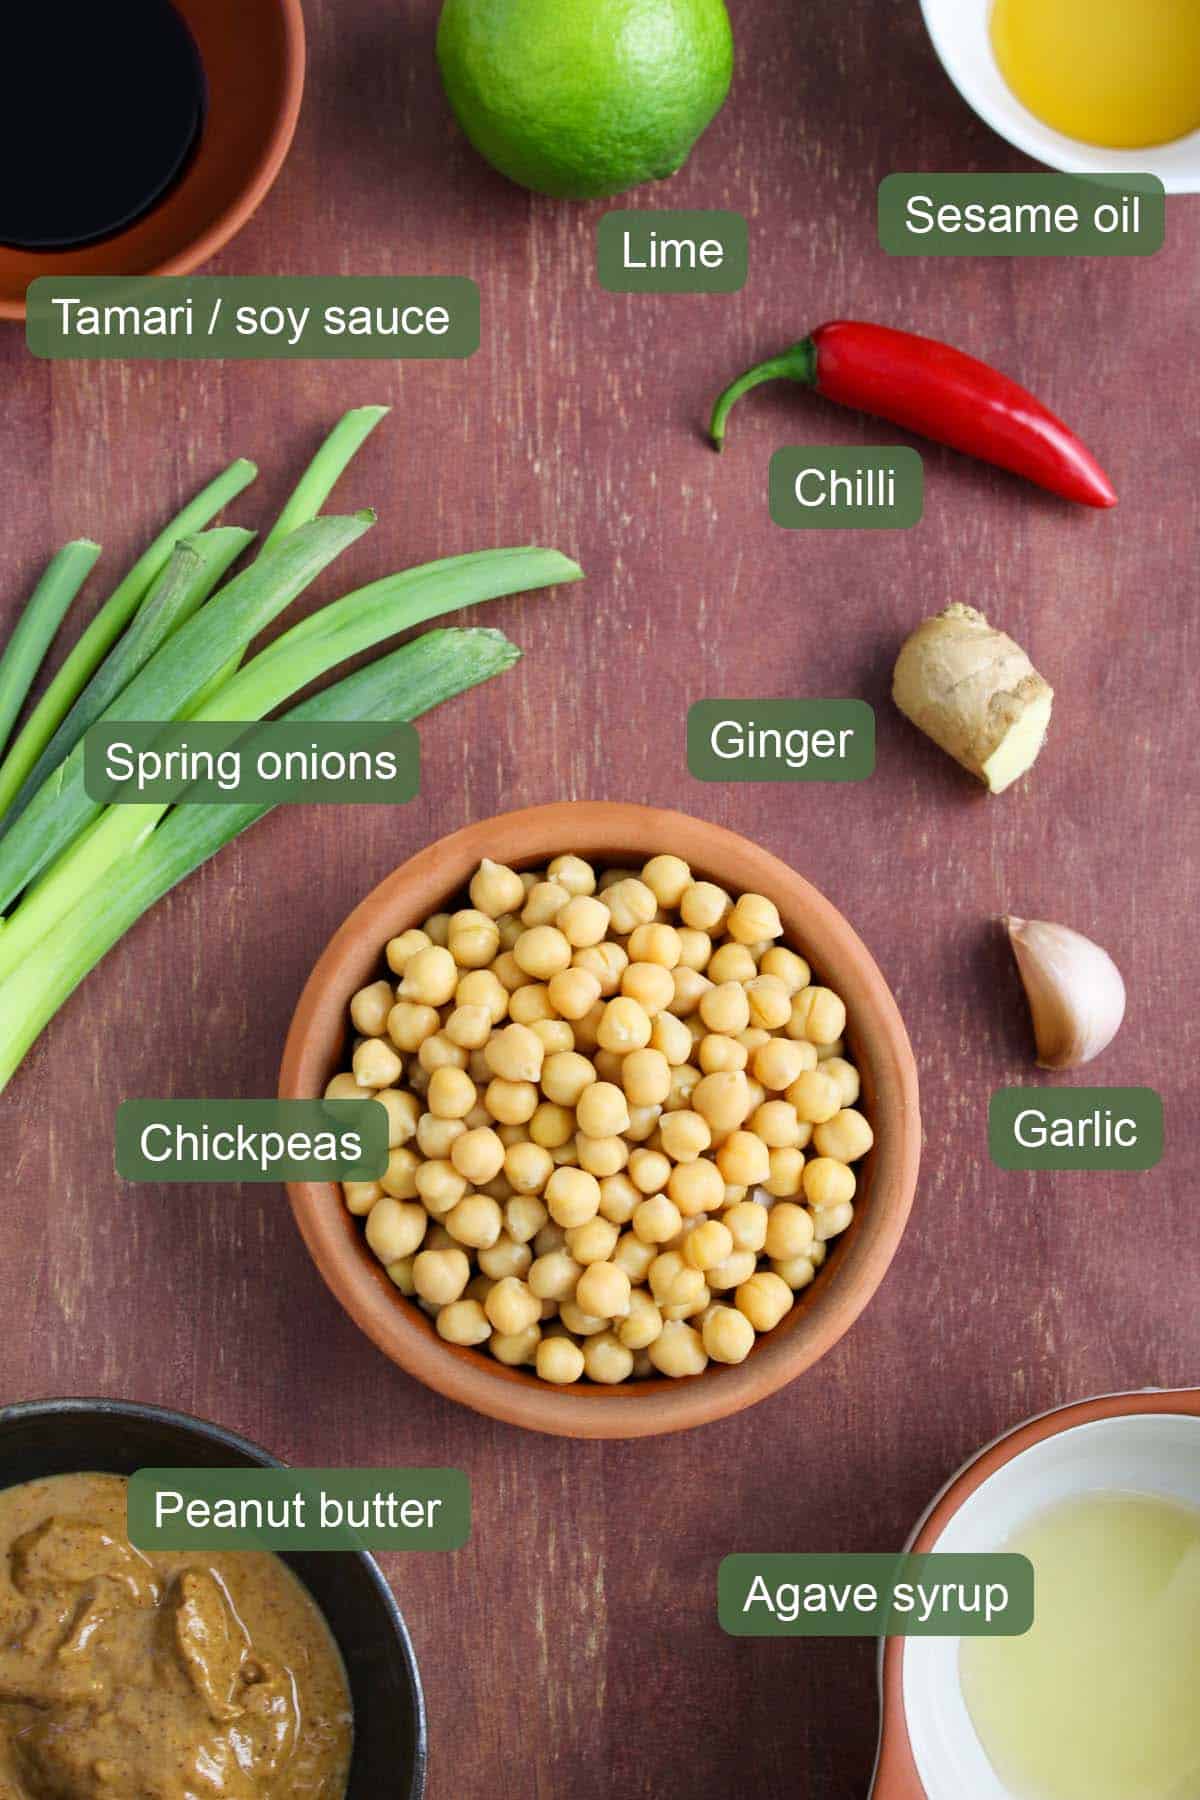 List of Ingredients to Make Chickpea Stir-Fry